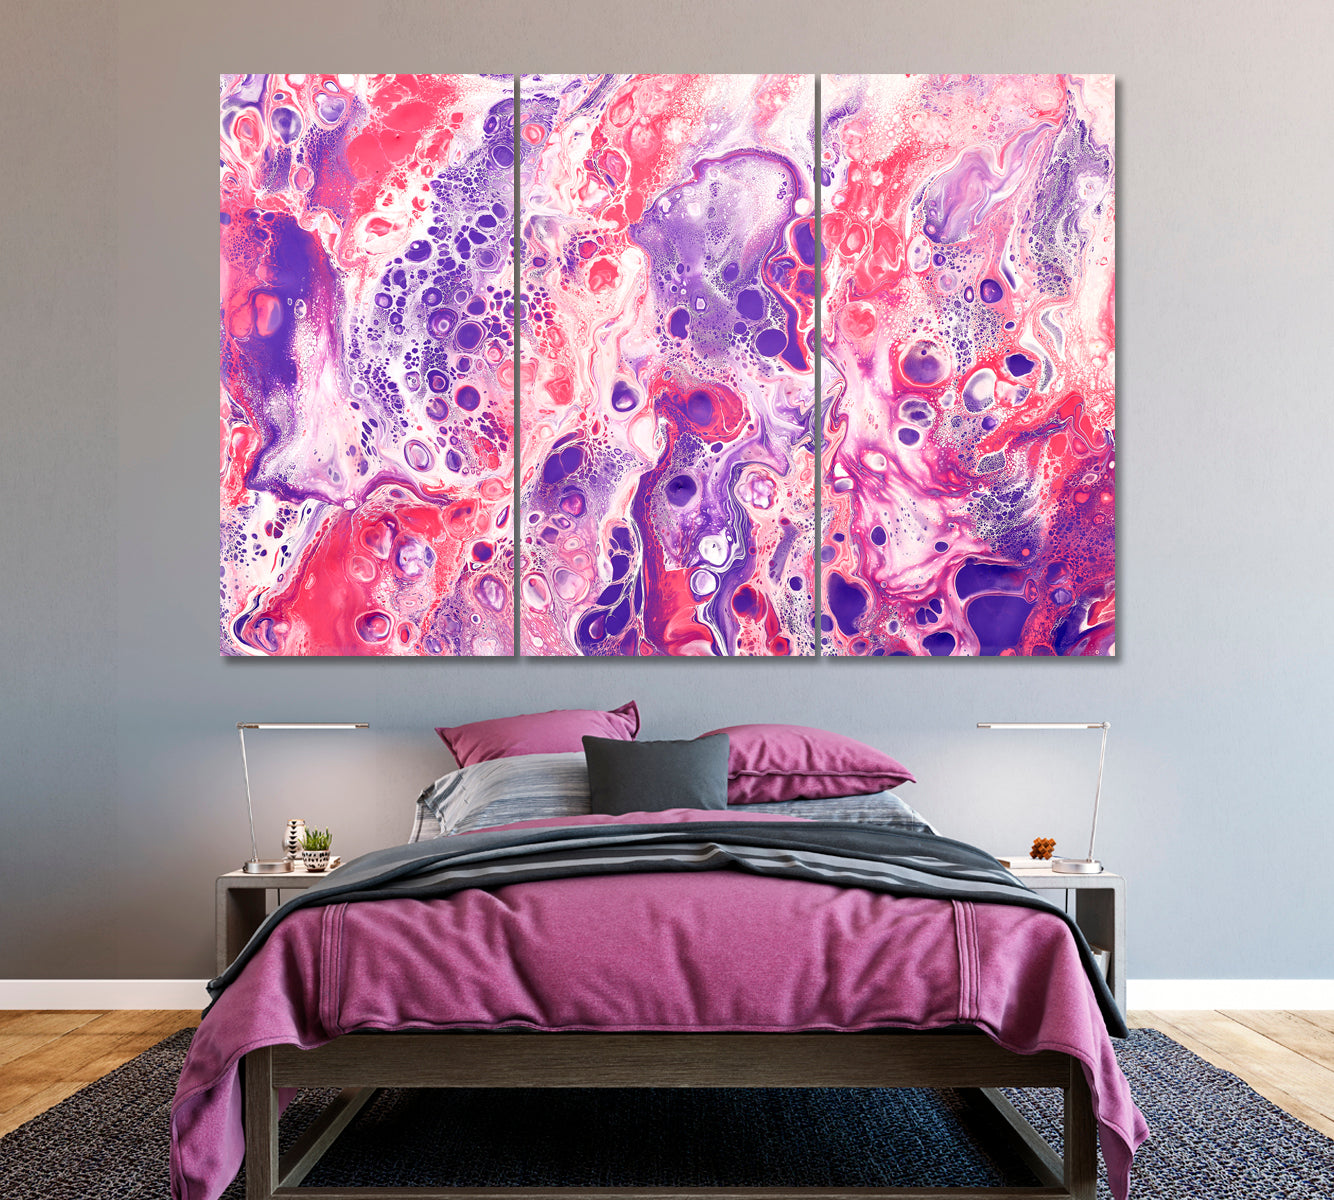 Modern Marble Painting Canvas Print ArtLexy 3 Panels 36"x24" inches 